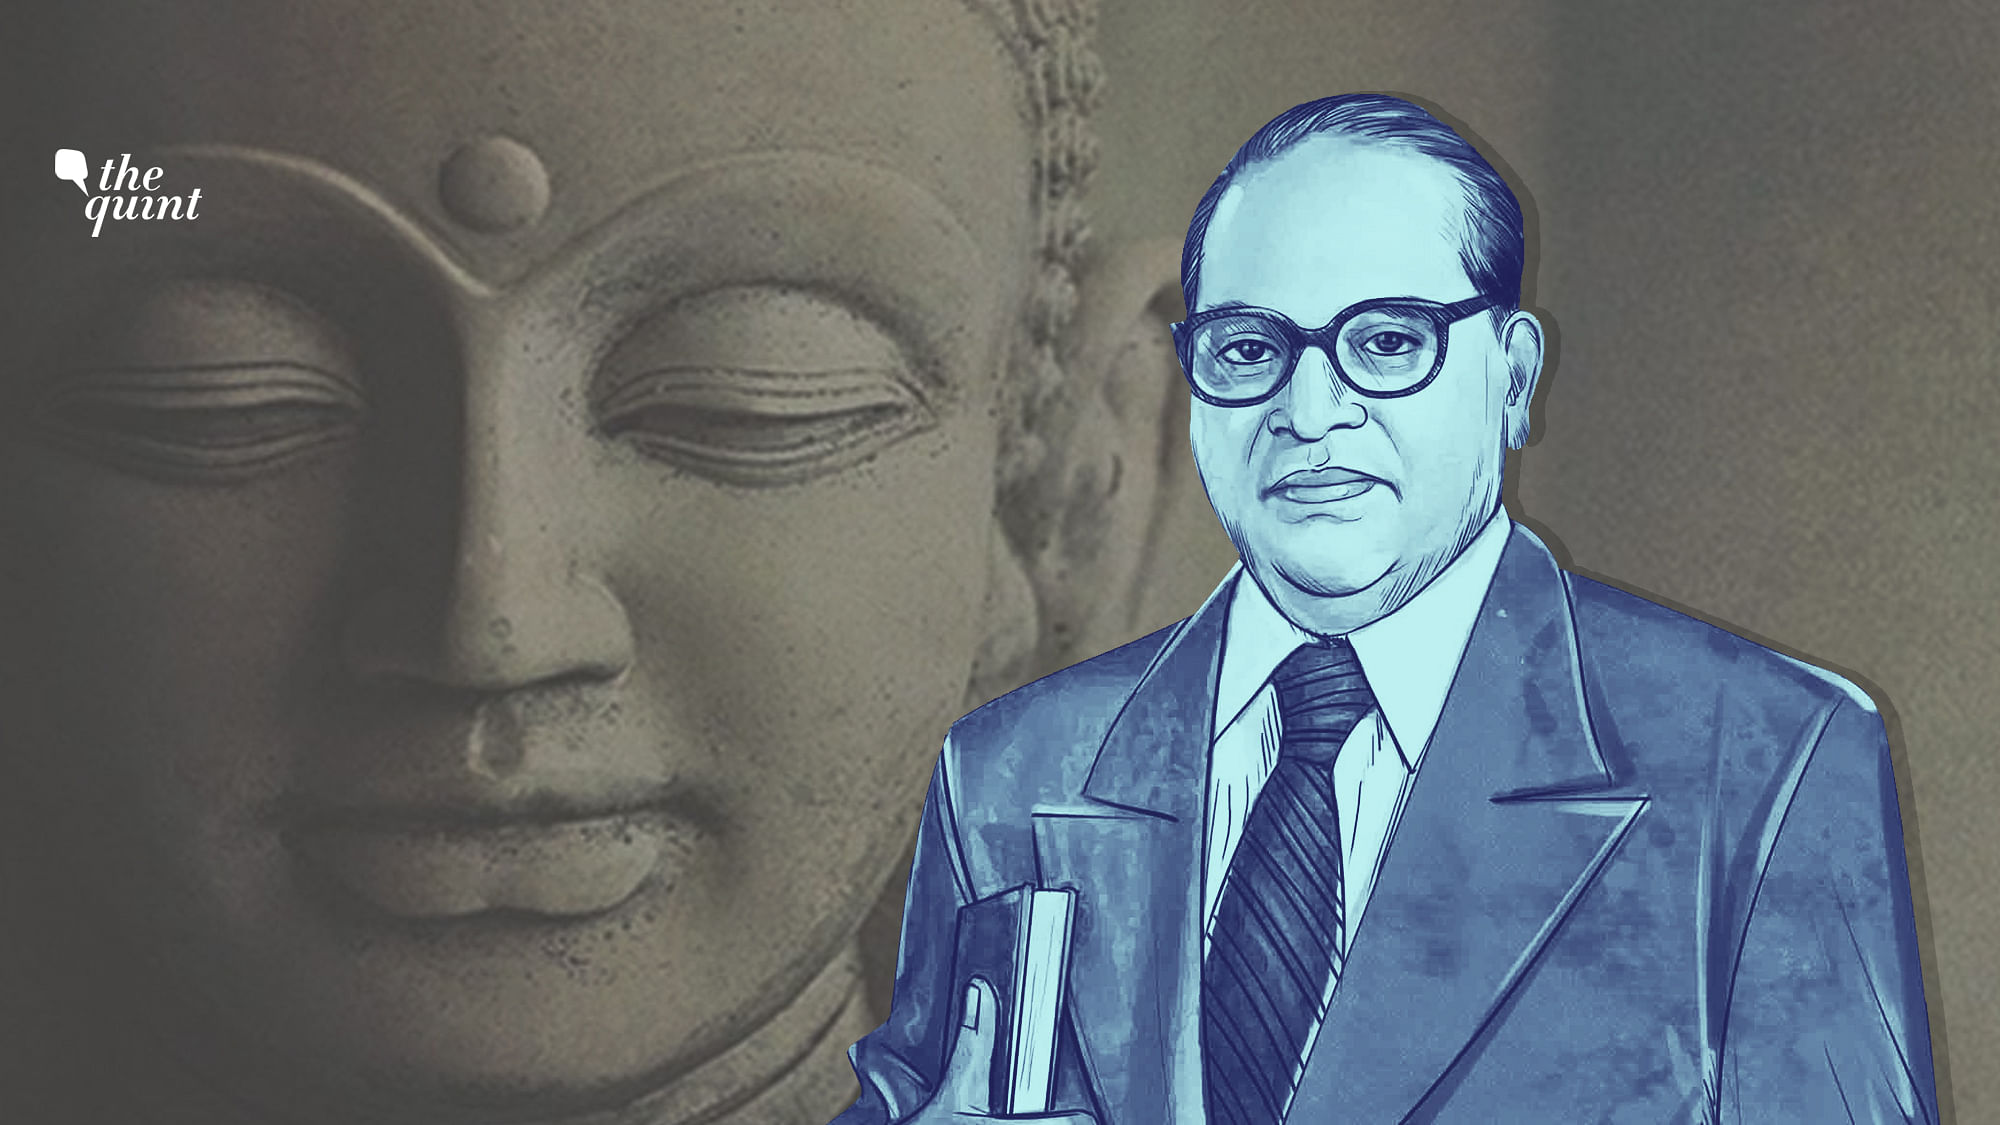 Why did Ambedkar convert, why did he choose to convert to Buddhism, why did he decide to convert in Nagpur and why did he alter not just his own path but the lives of a largely marginalised Dalit community?